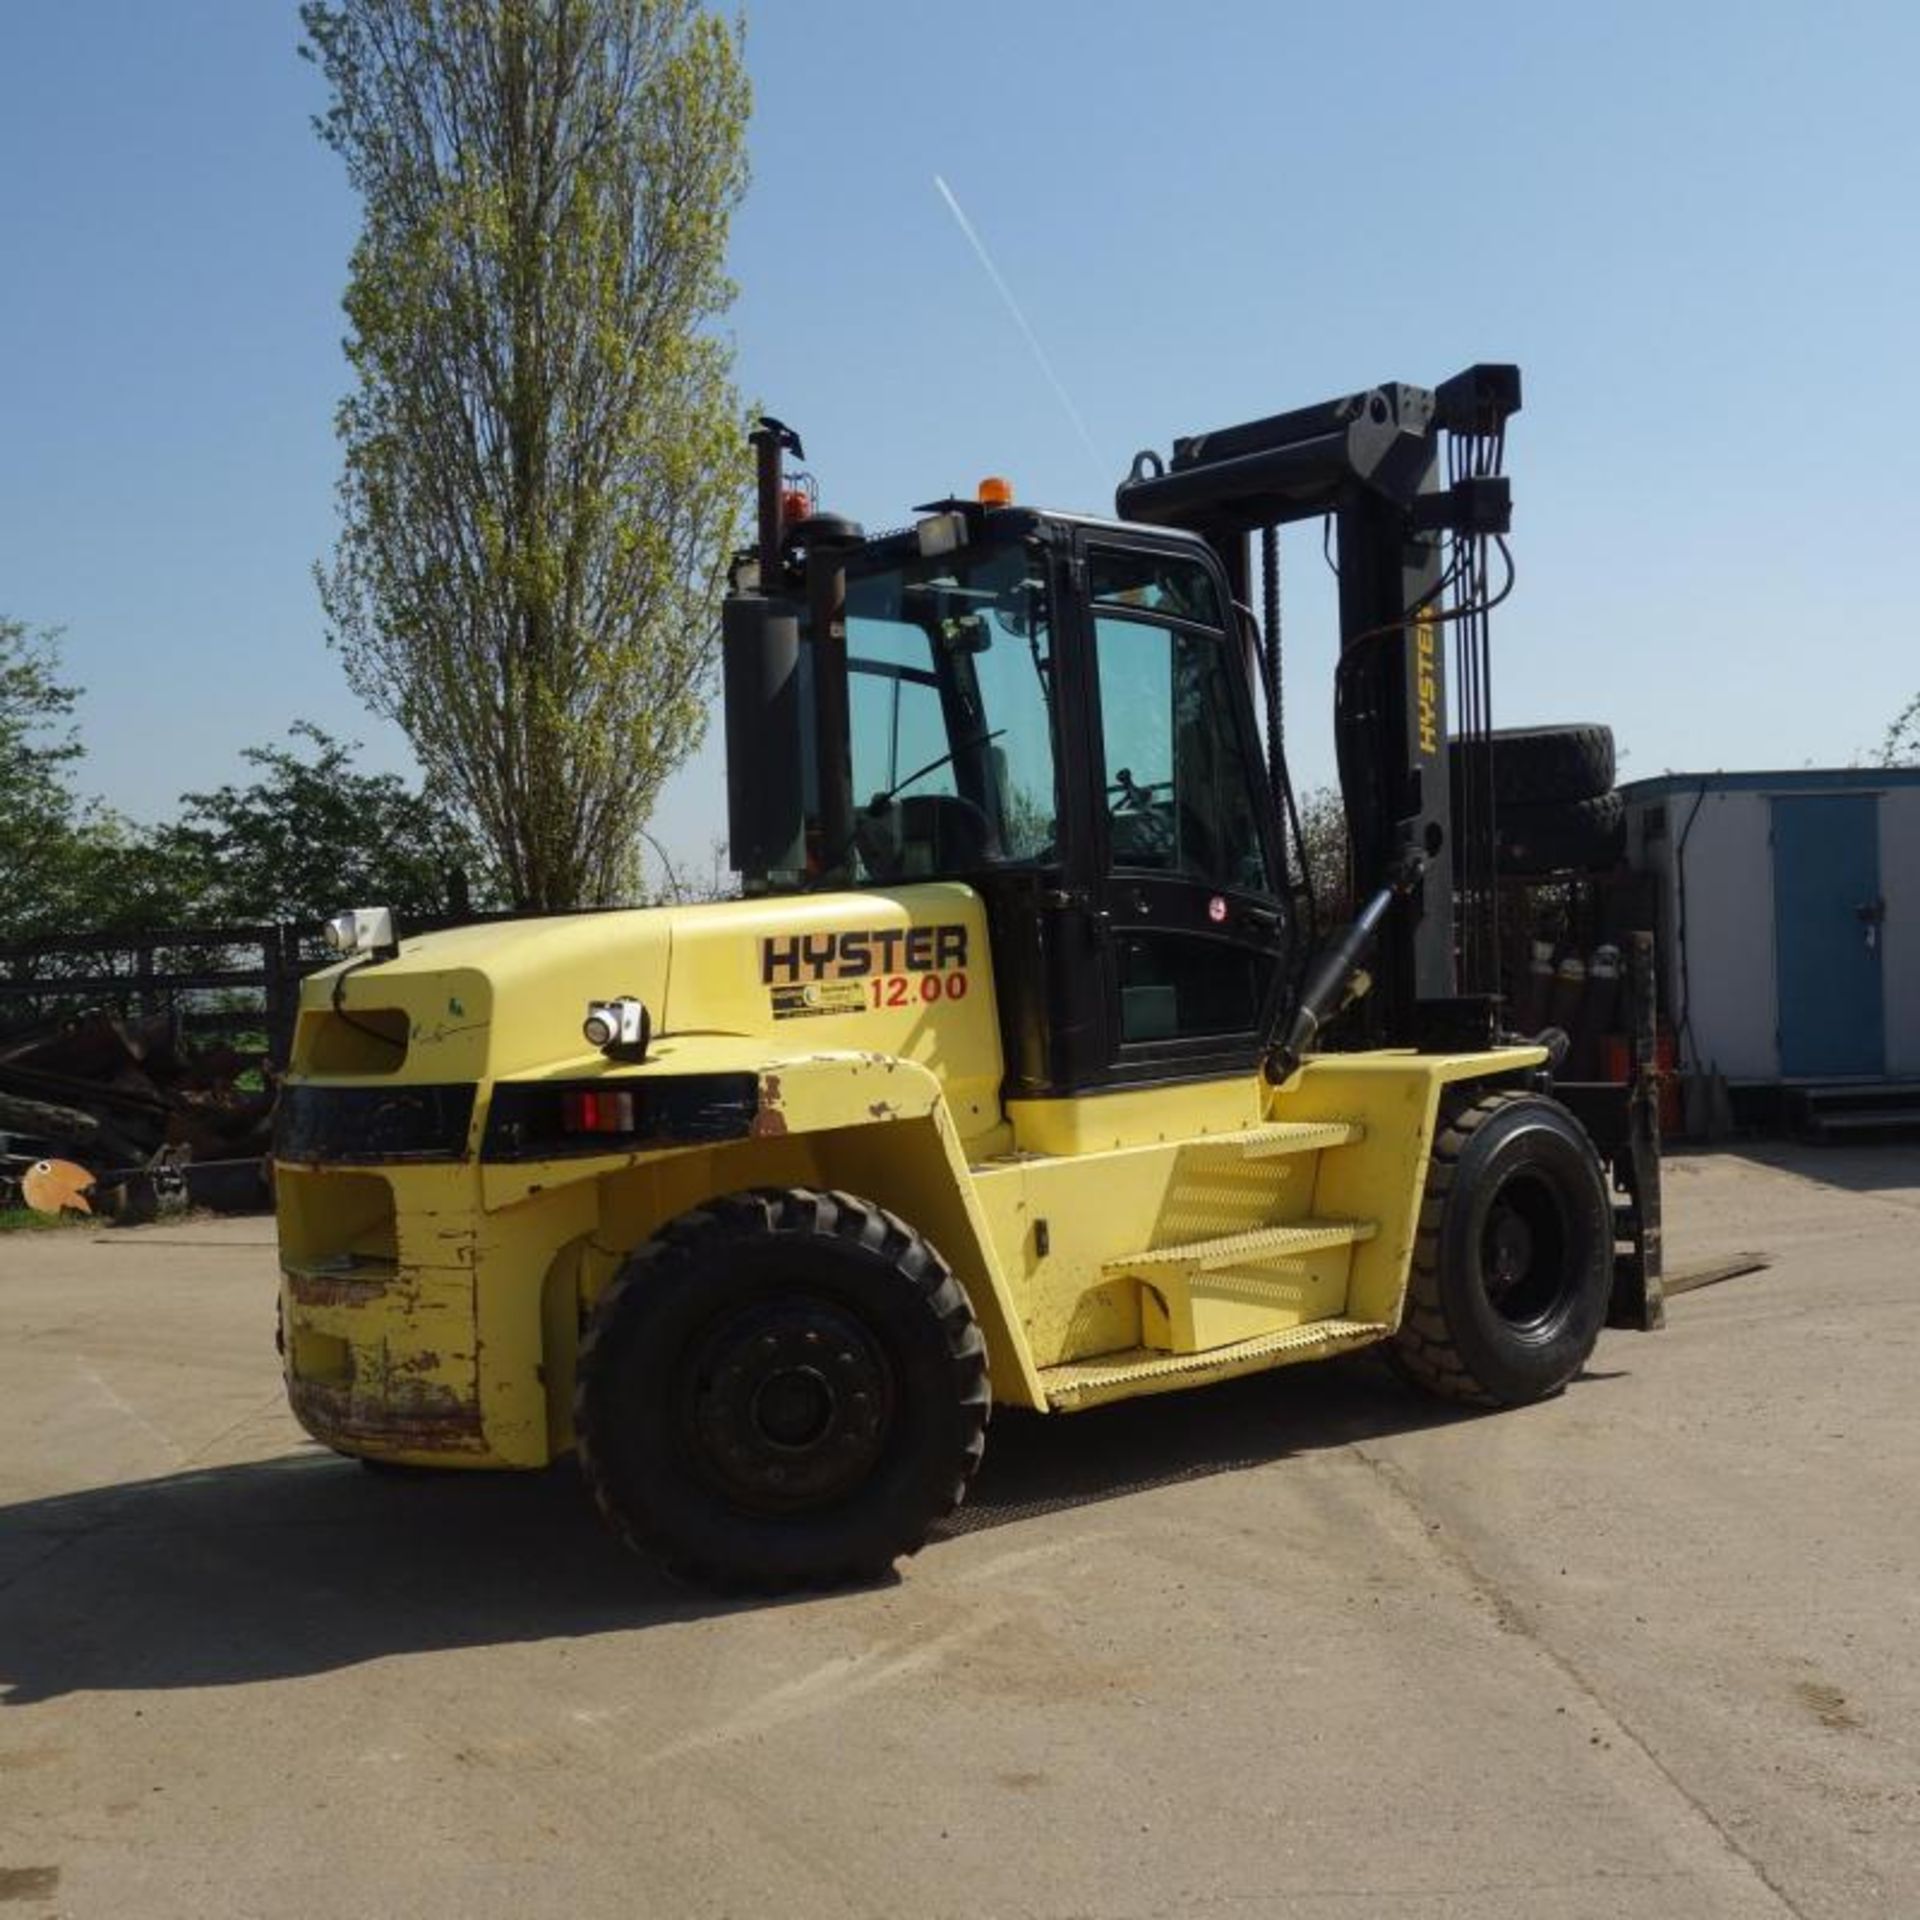 2006 Hyster M12.00xm 12 Ton Forklift, 8151 Hours From New - Image 3 of 5